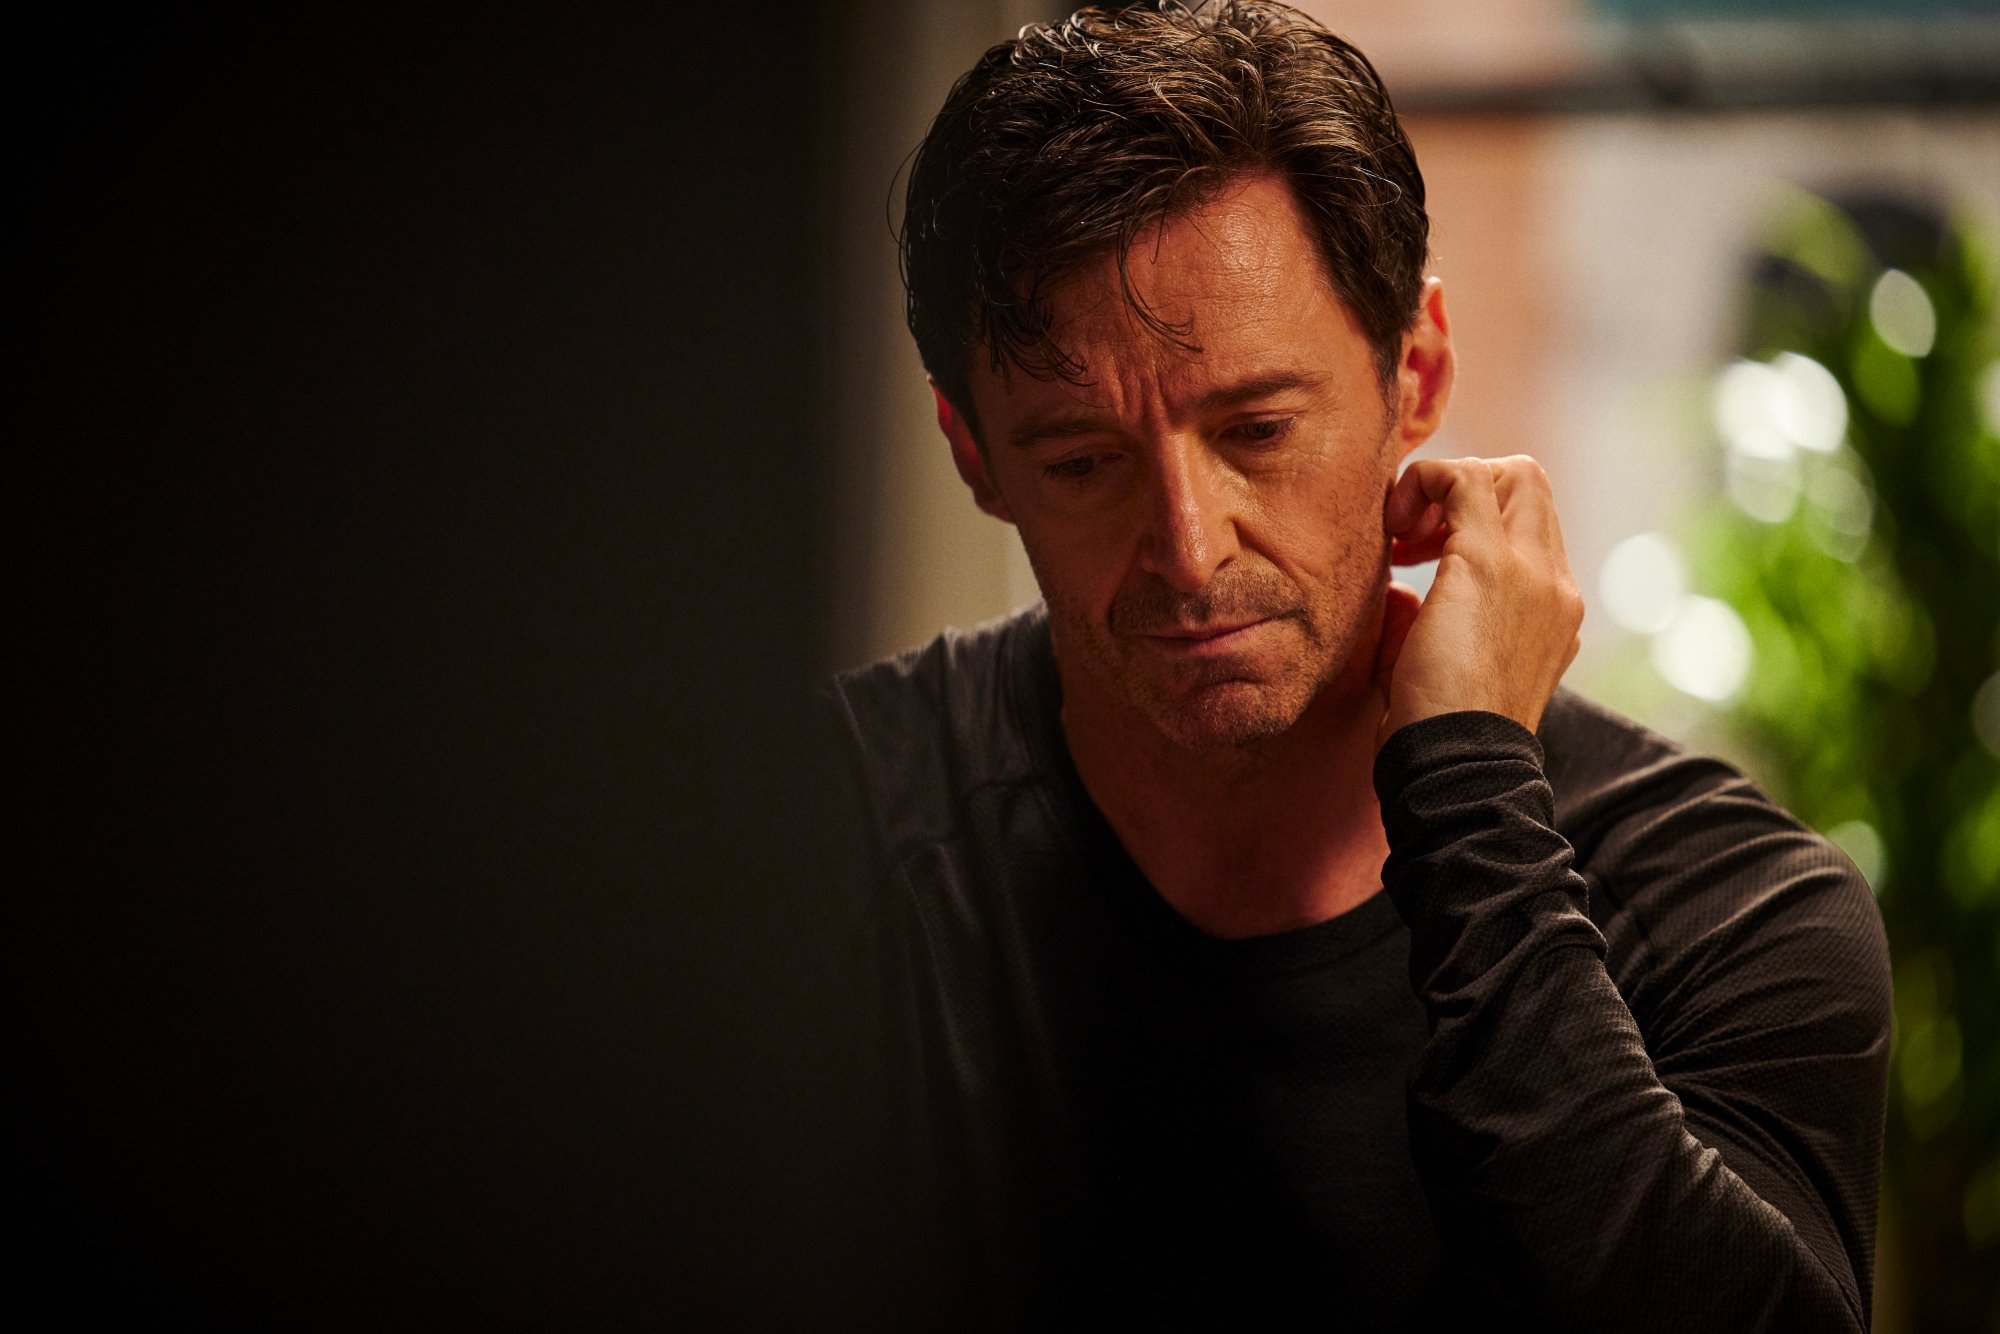 'The Son' Hugh Jackman as Peter looking down with a sad look on his face.  He's resting his hand on the back of his neck.